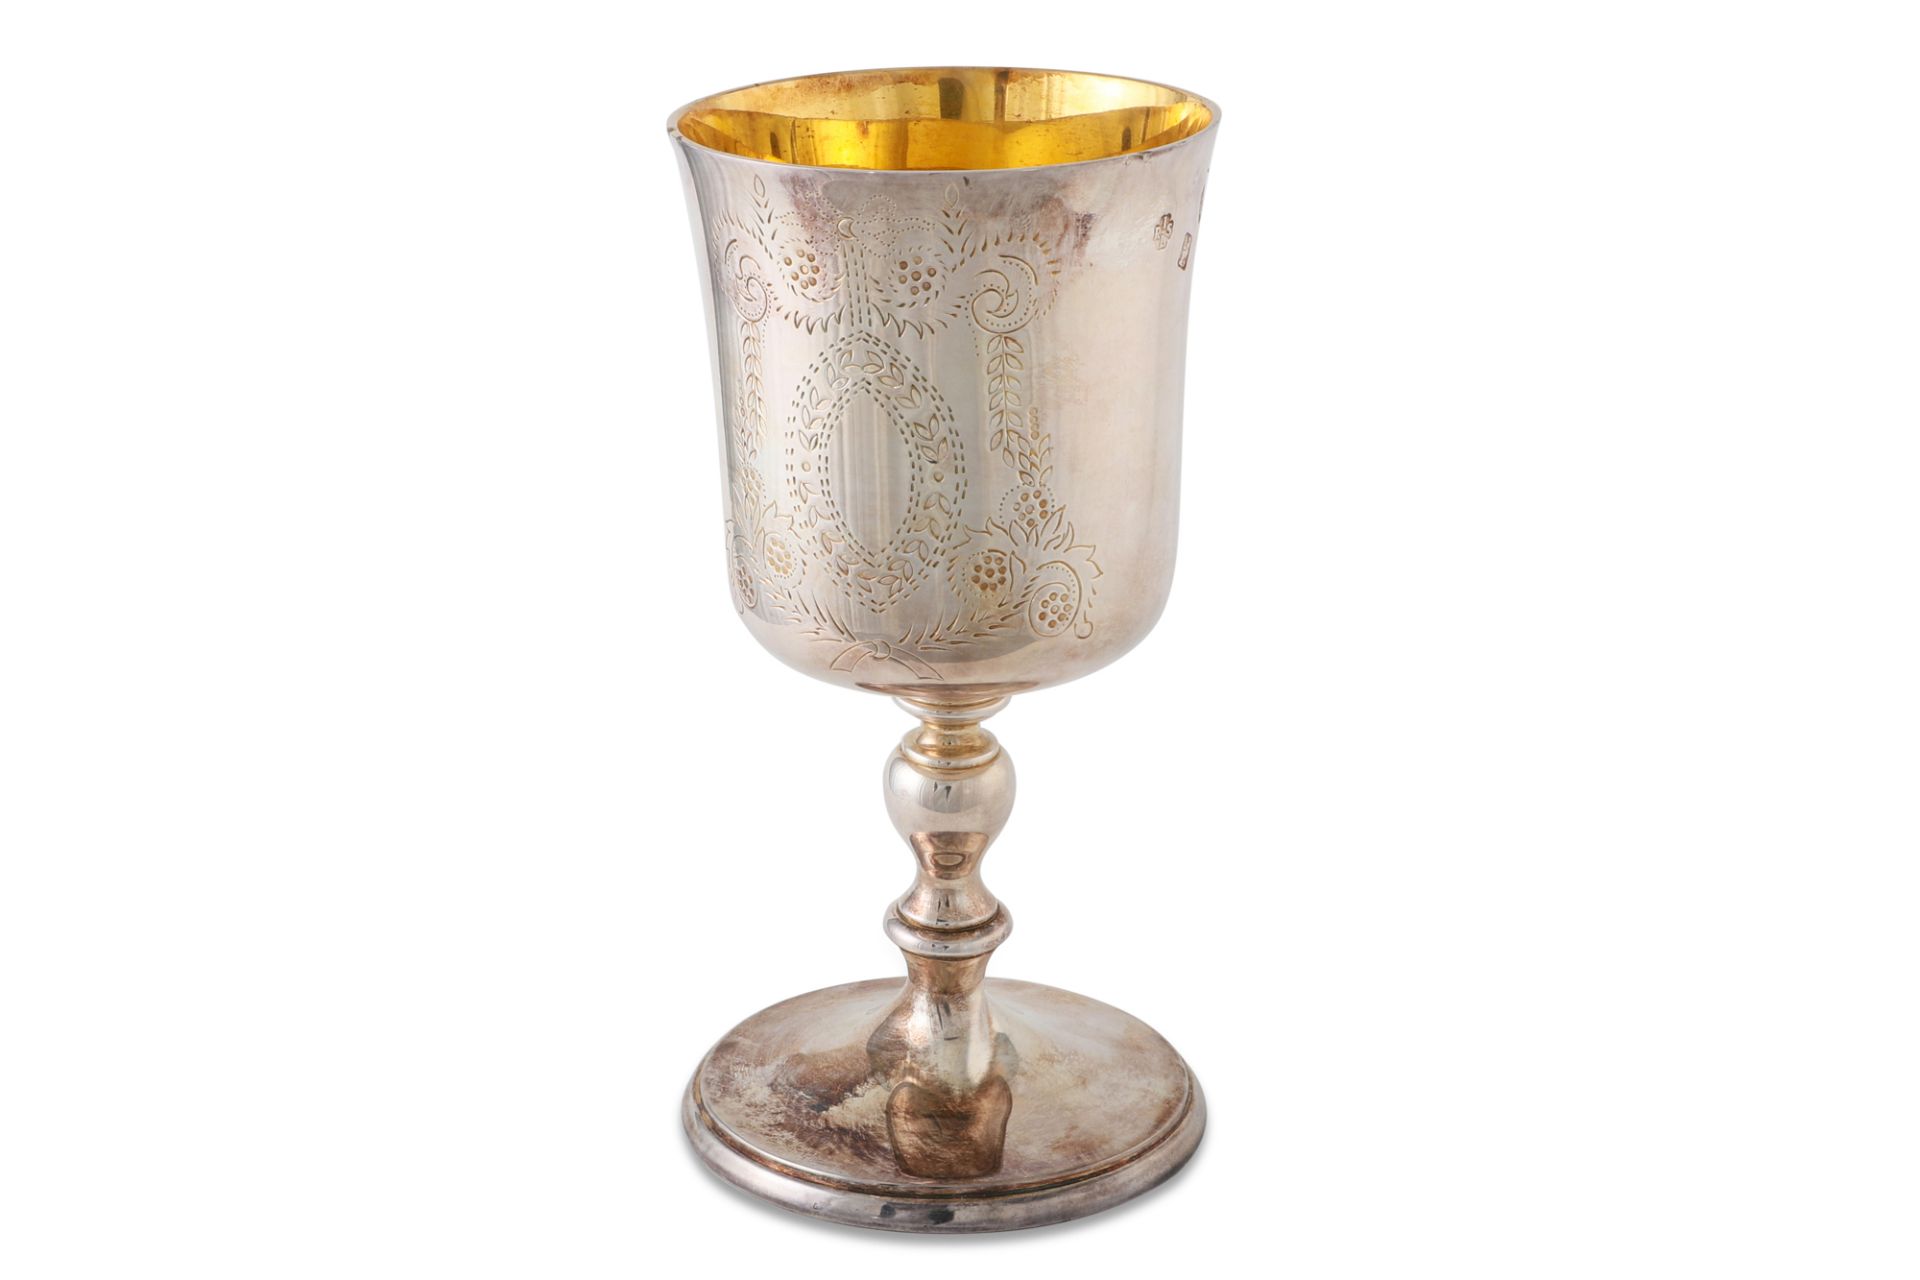 A LATE 20TH CENTURY IRISH SILVER GILT CHALICE/GOBLET, with engraved decoration, raised over a